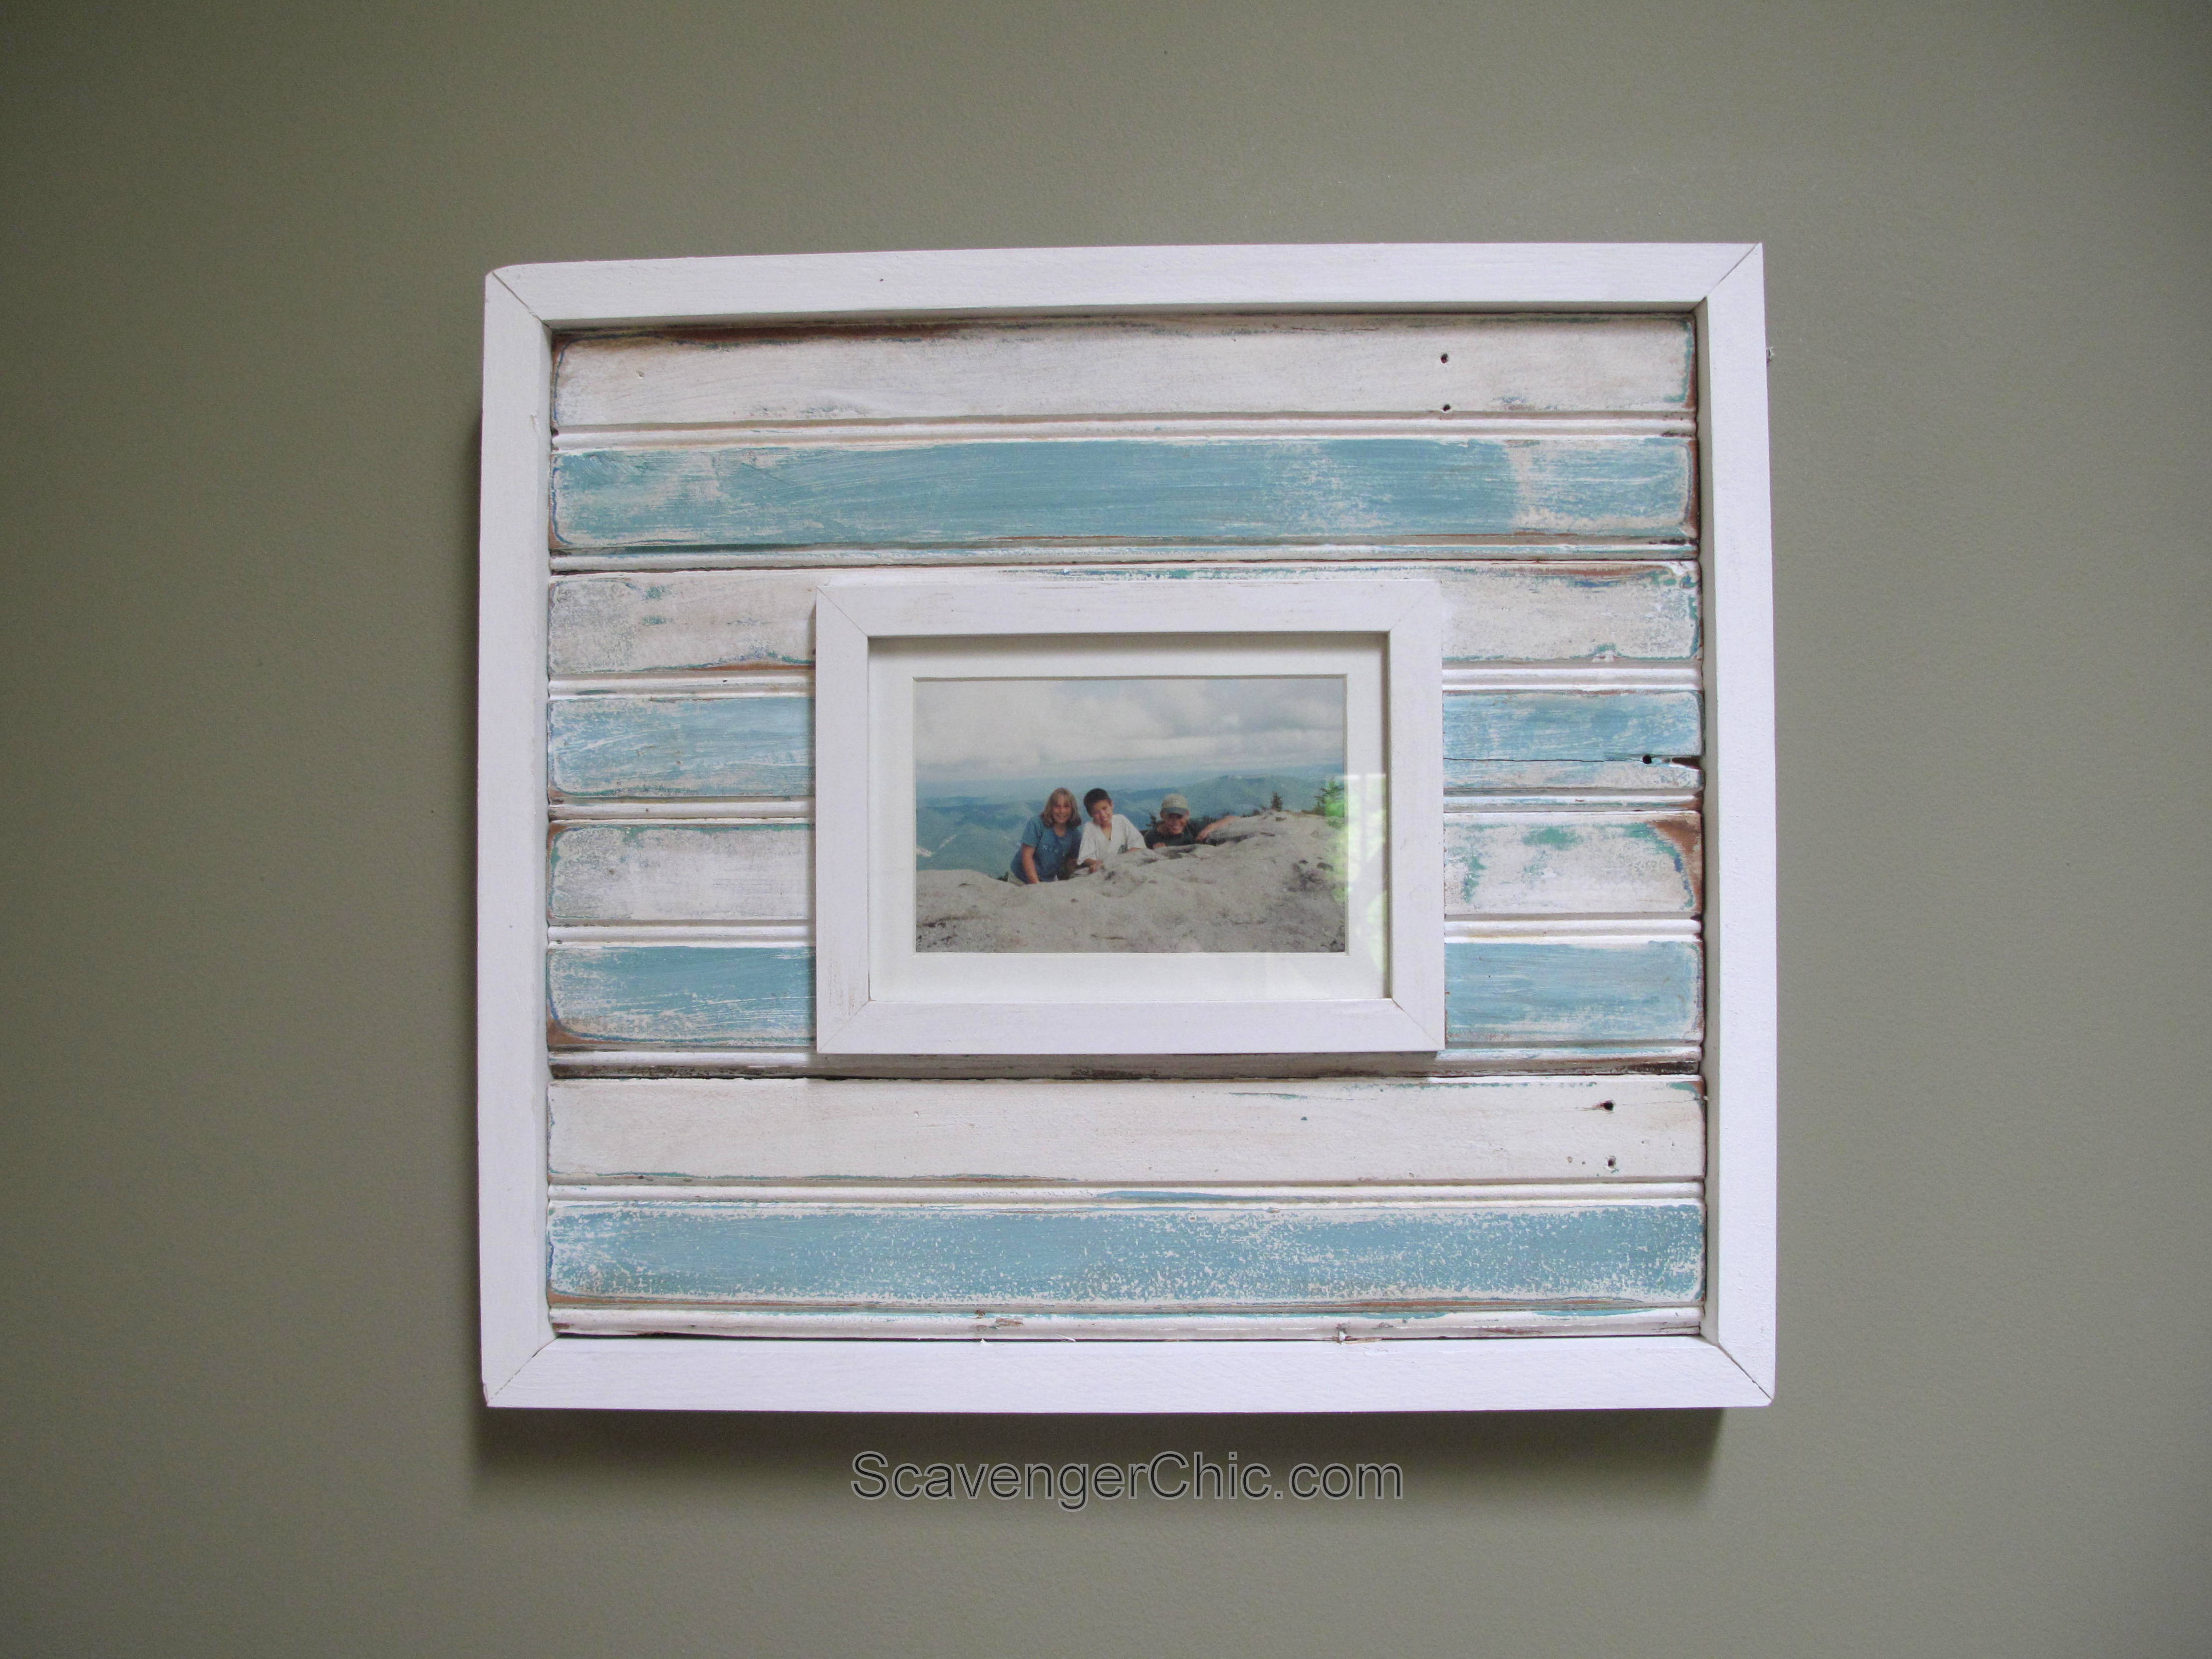 Vintage Style Beadboard Picture Frame - Scavenger Chic4416 x 3312